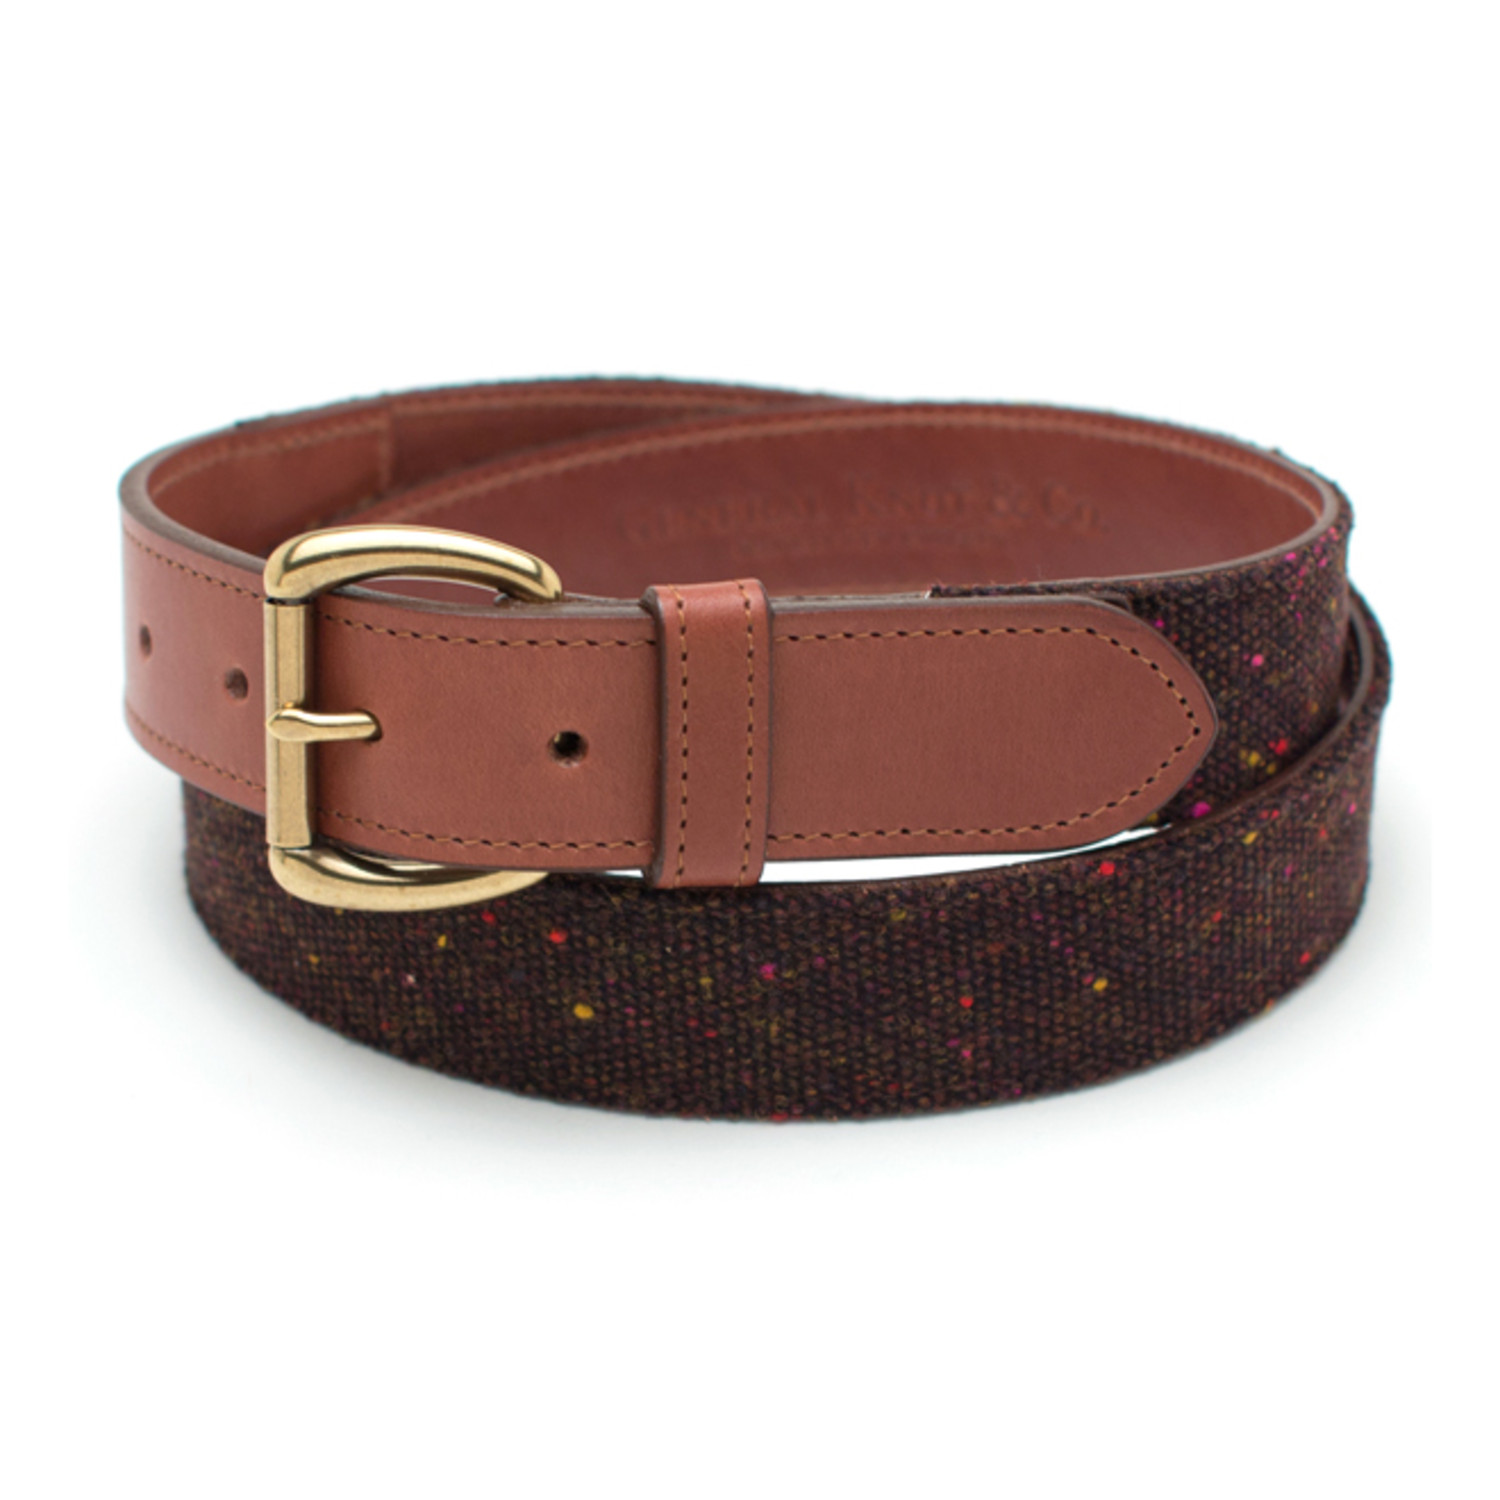 Vintage Fabric + Leather Belt // Chocolate Donegal Wool & Chestnut ...